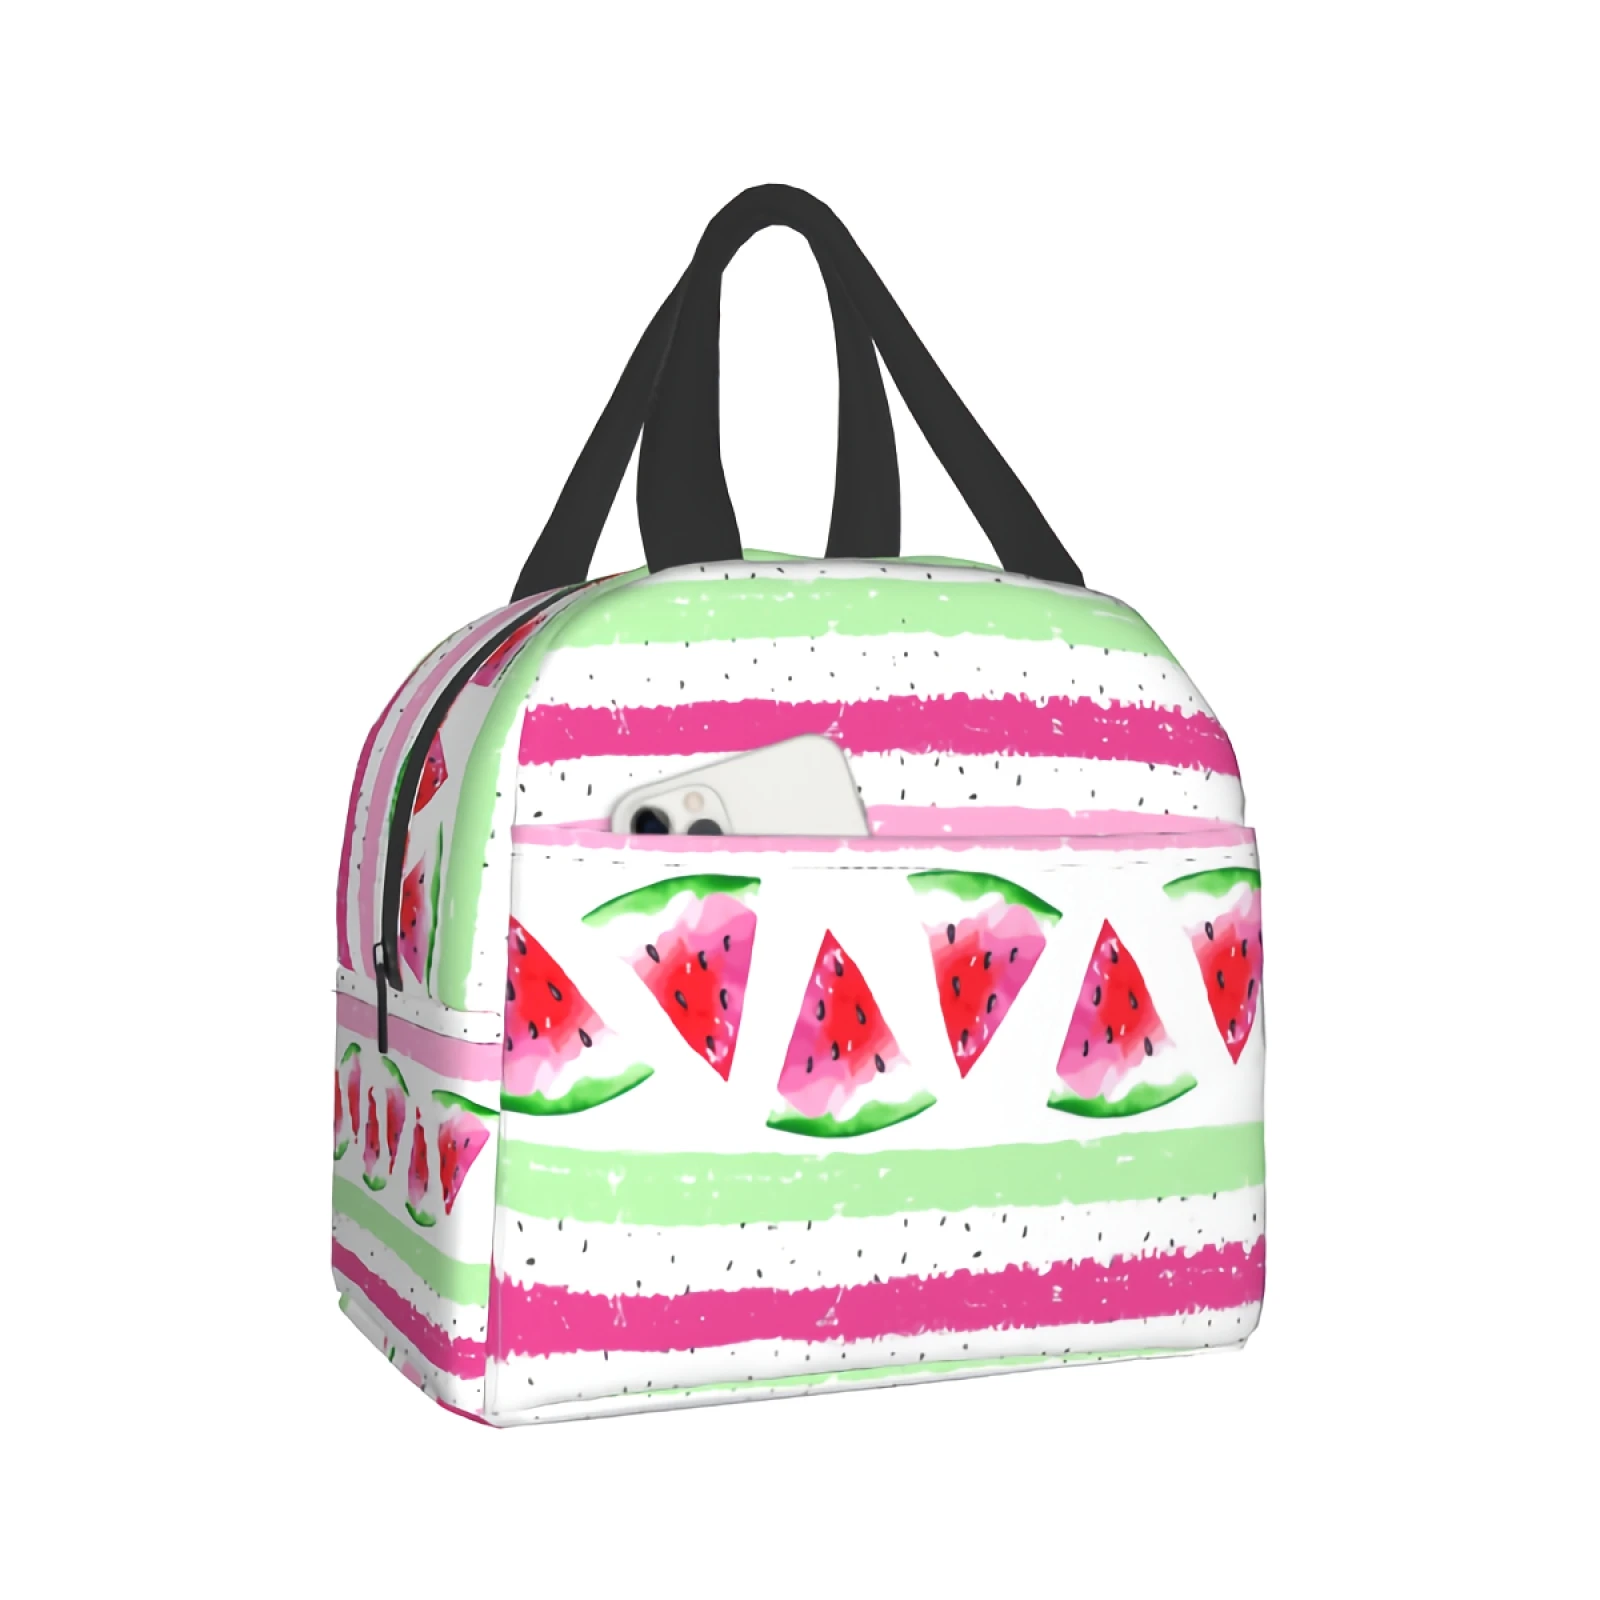 

Imiss Watercolor Watermelon Insulated Lunch Bag for Women Men Summer Fruit With Colorful Stripes Small Lunch Box Container